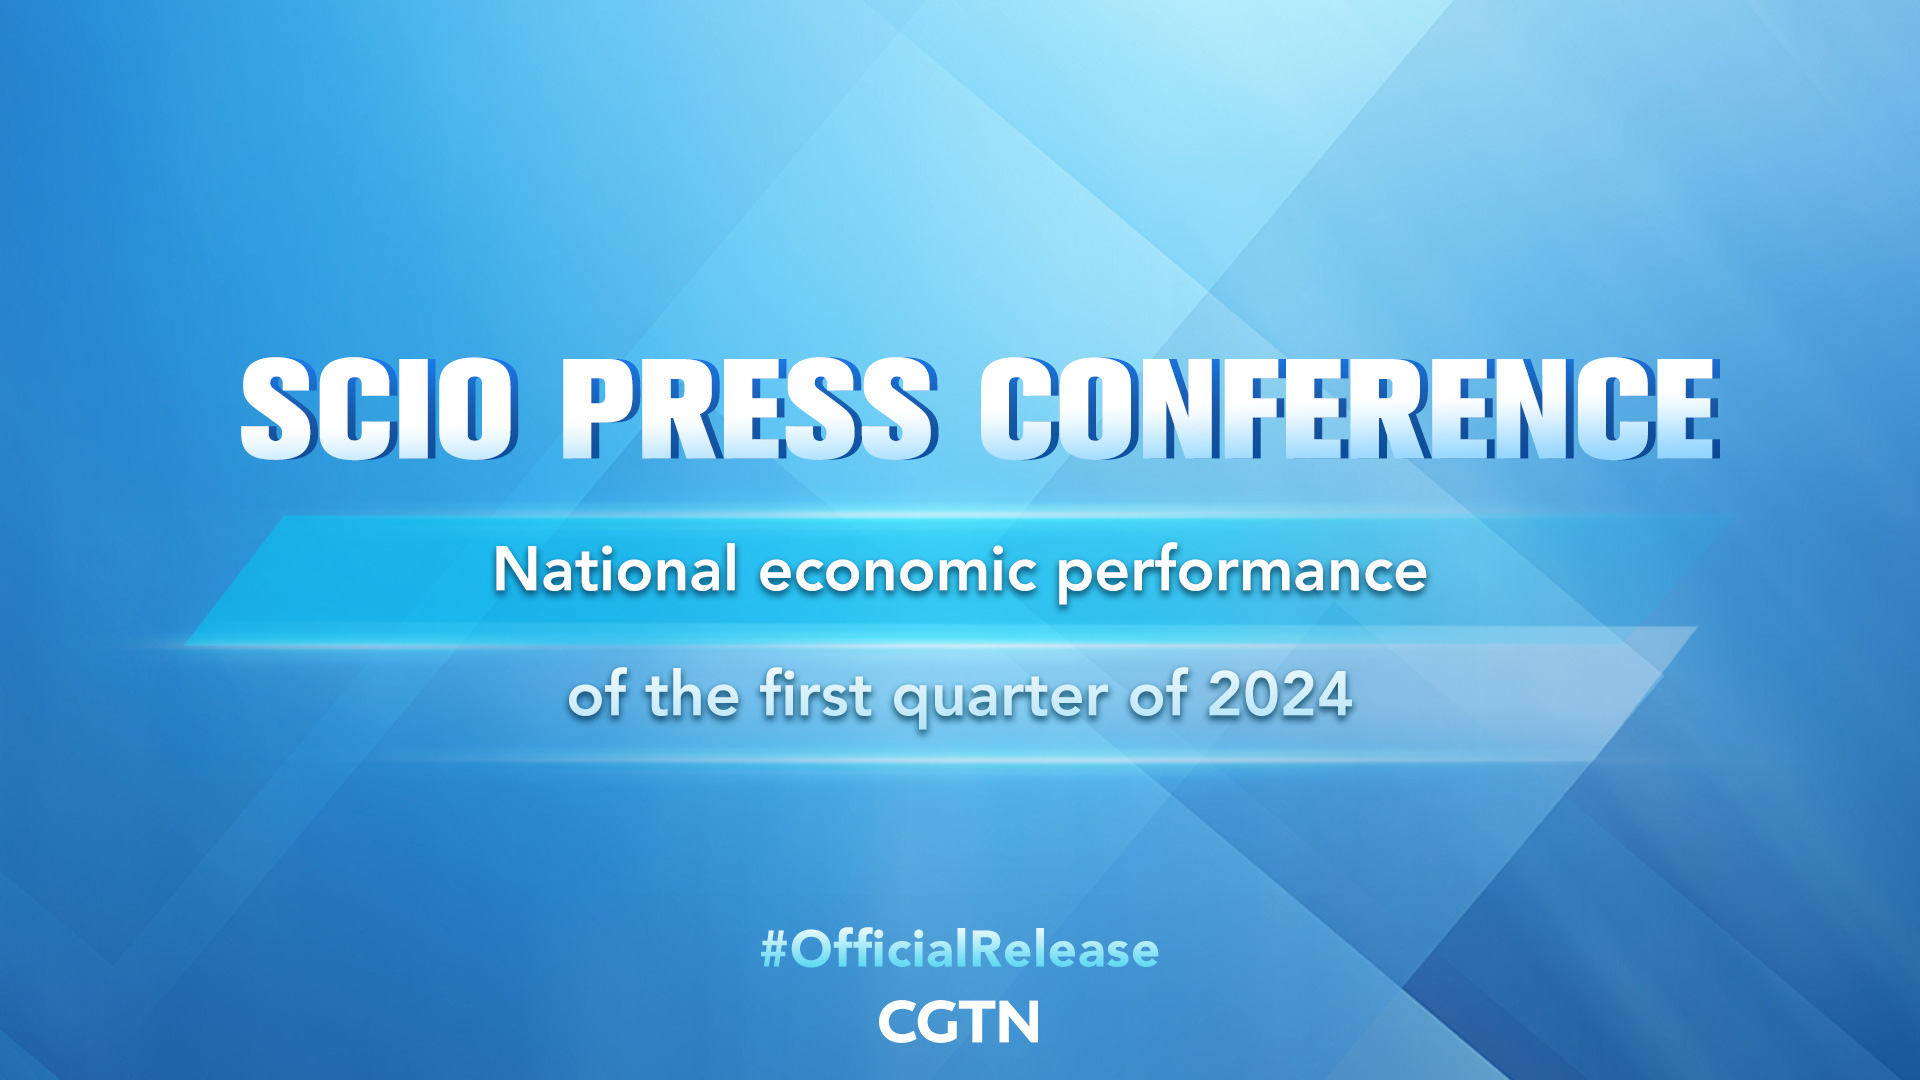 Live: Press conference on national economic performance of the first quarter of 2024